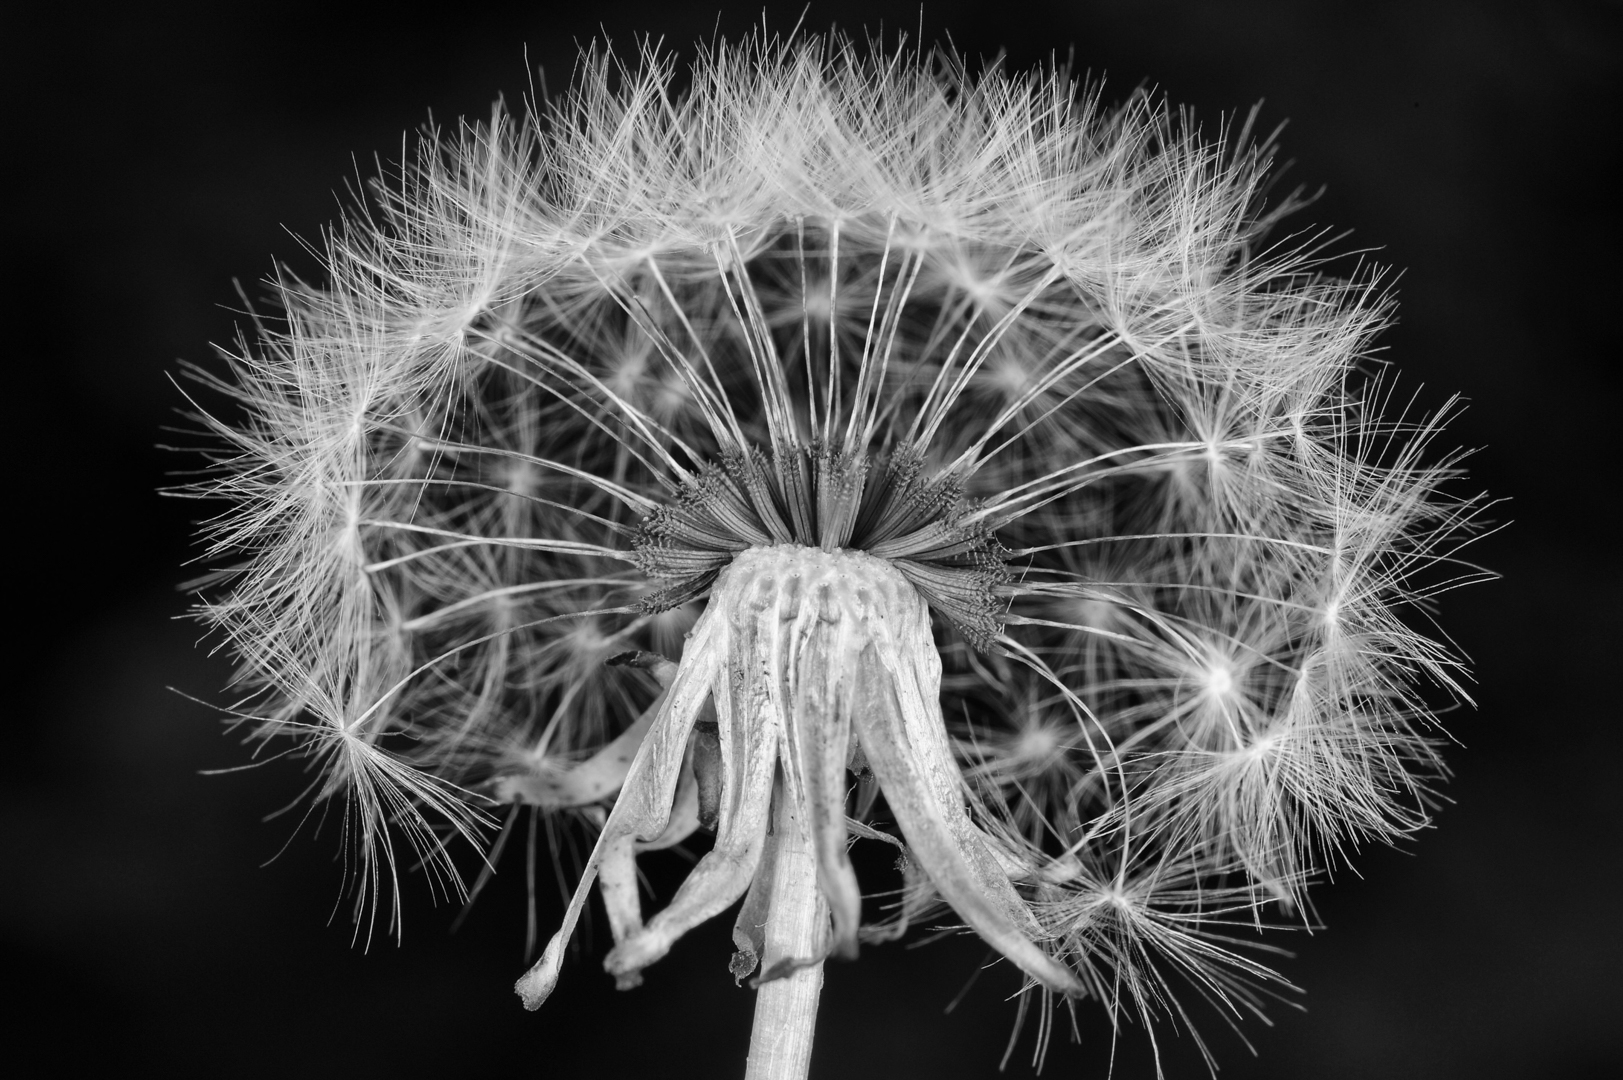 Dandelion by Georges Dormoy